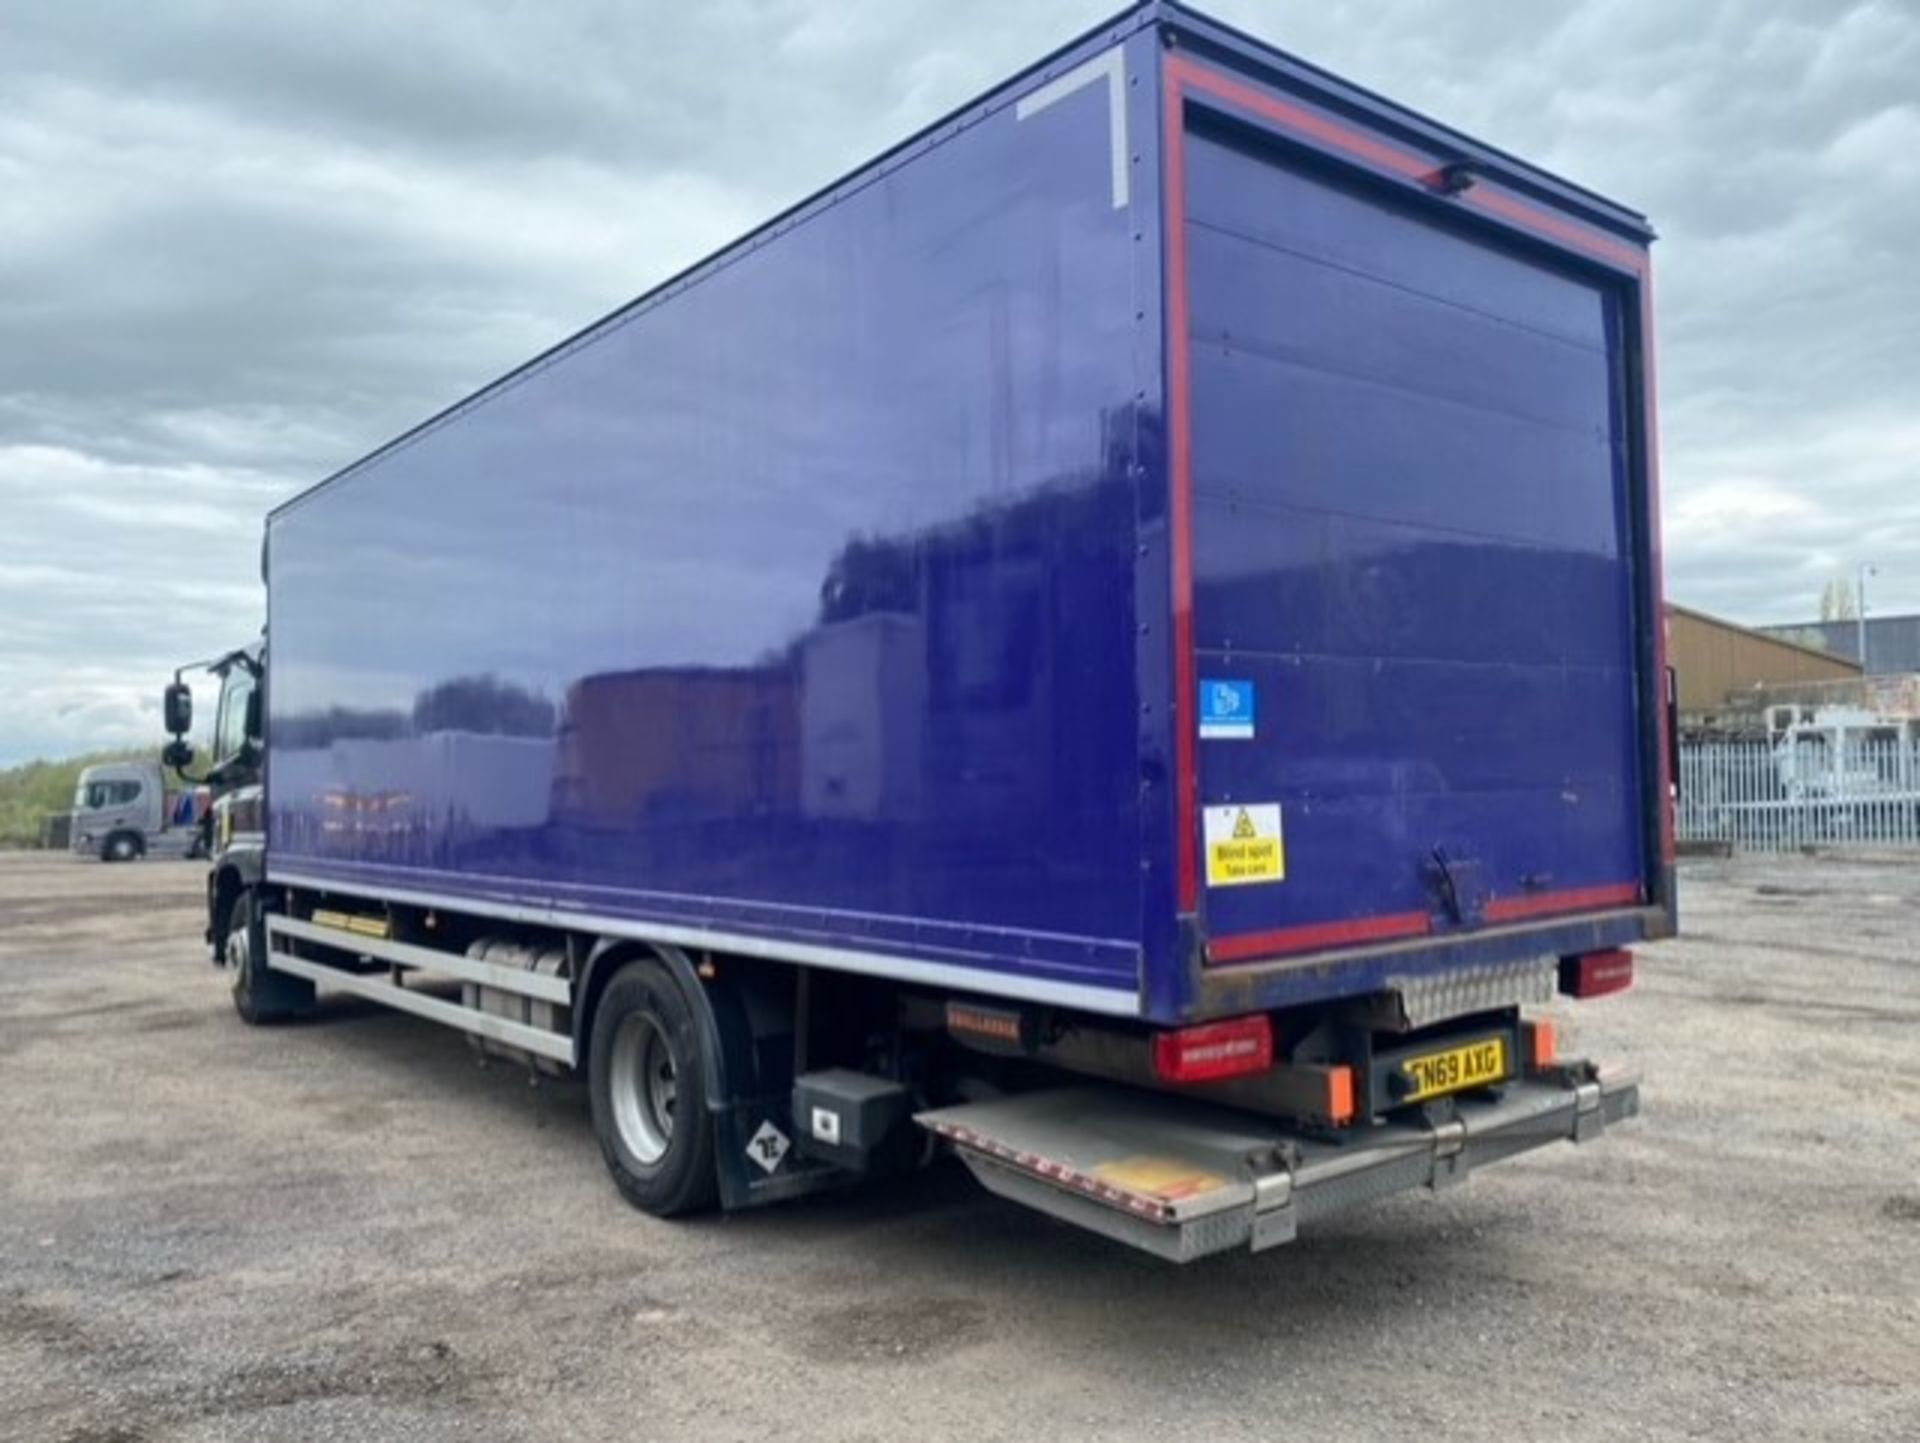 2019, DAF CF 260 FA (Ex-Fleet Owned & Maintained) - FN69 AXG (18 Ton Rigid Truck with Tail Lift) - Image 16 of 16